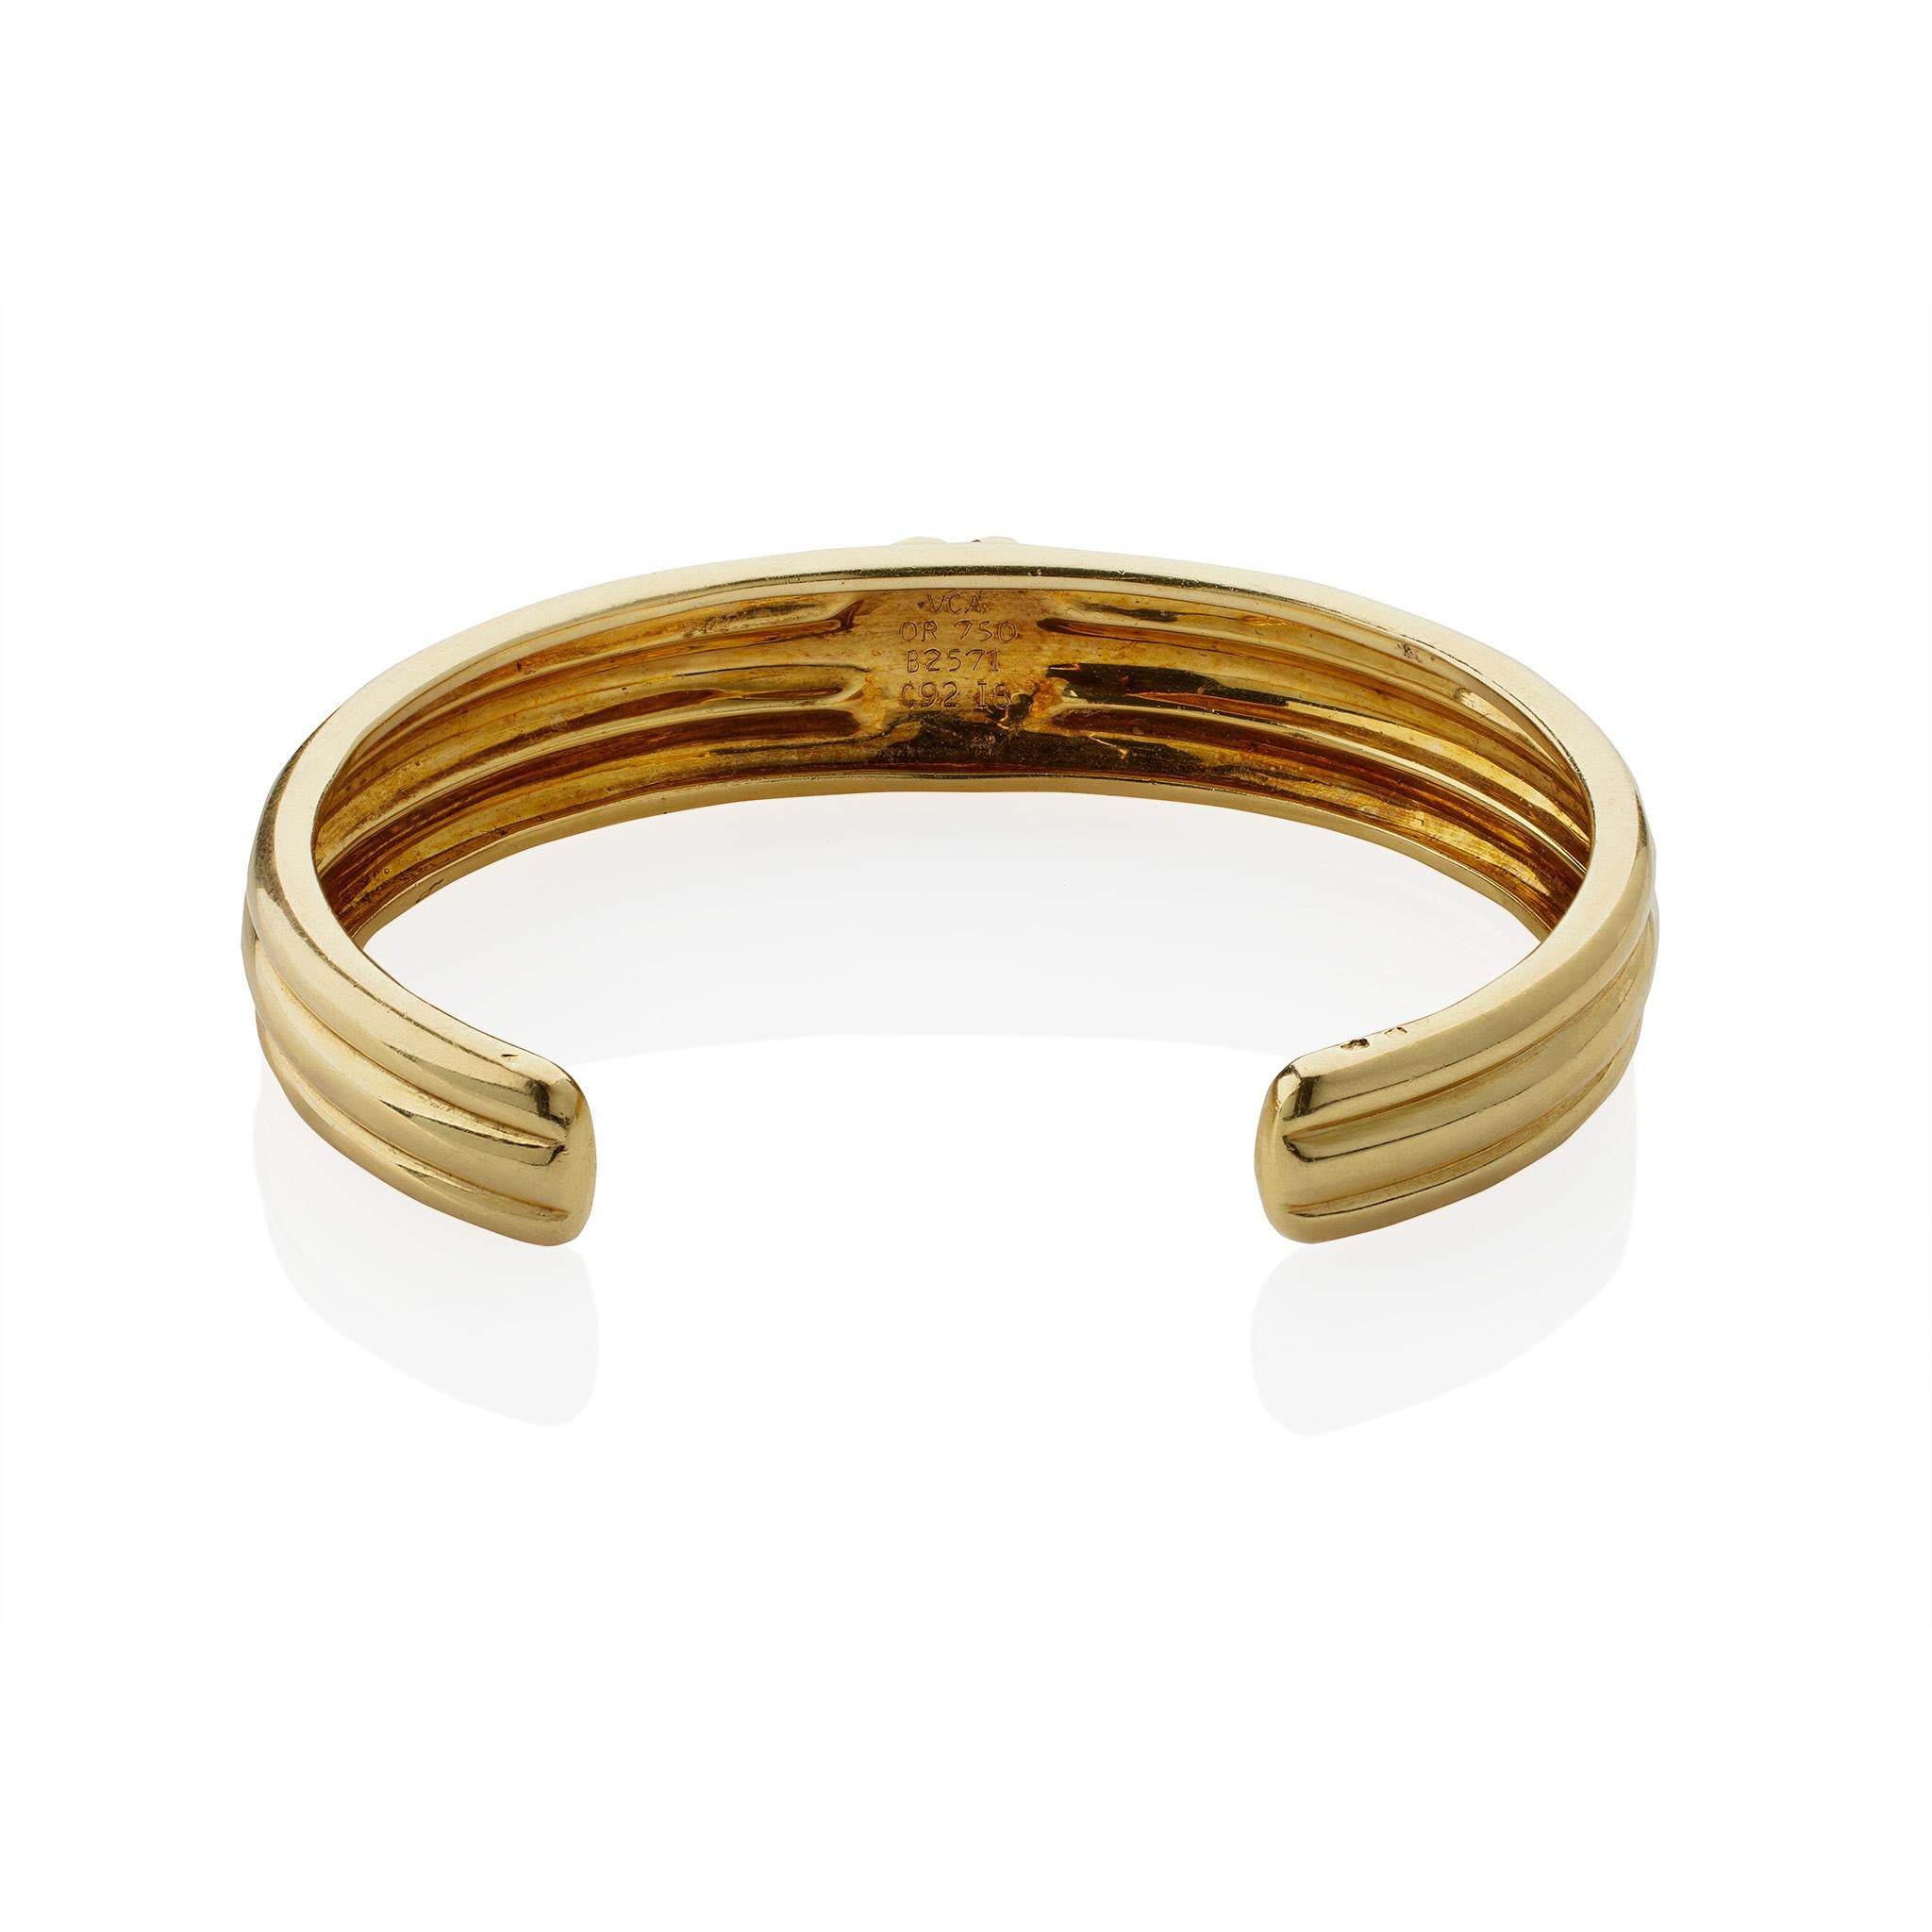 Van Cleef & Arpels Paris 18K Gold and Hardstone Cuff Bracelet In Excellent Condition For Sale In New York, NY